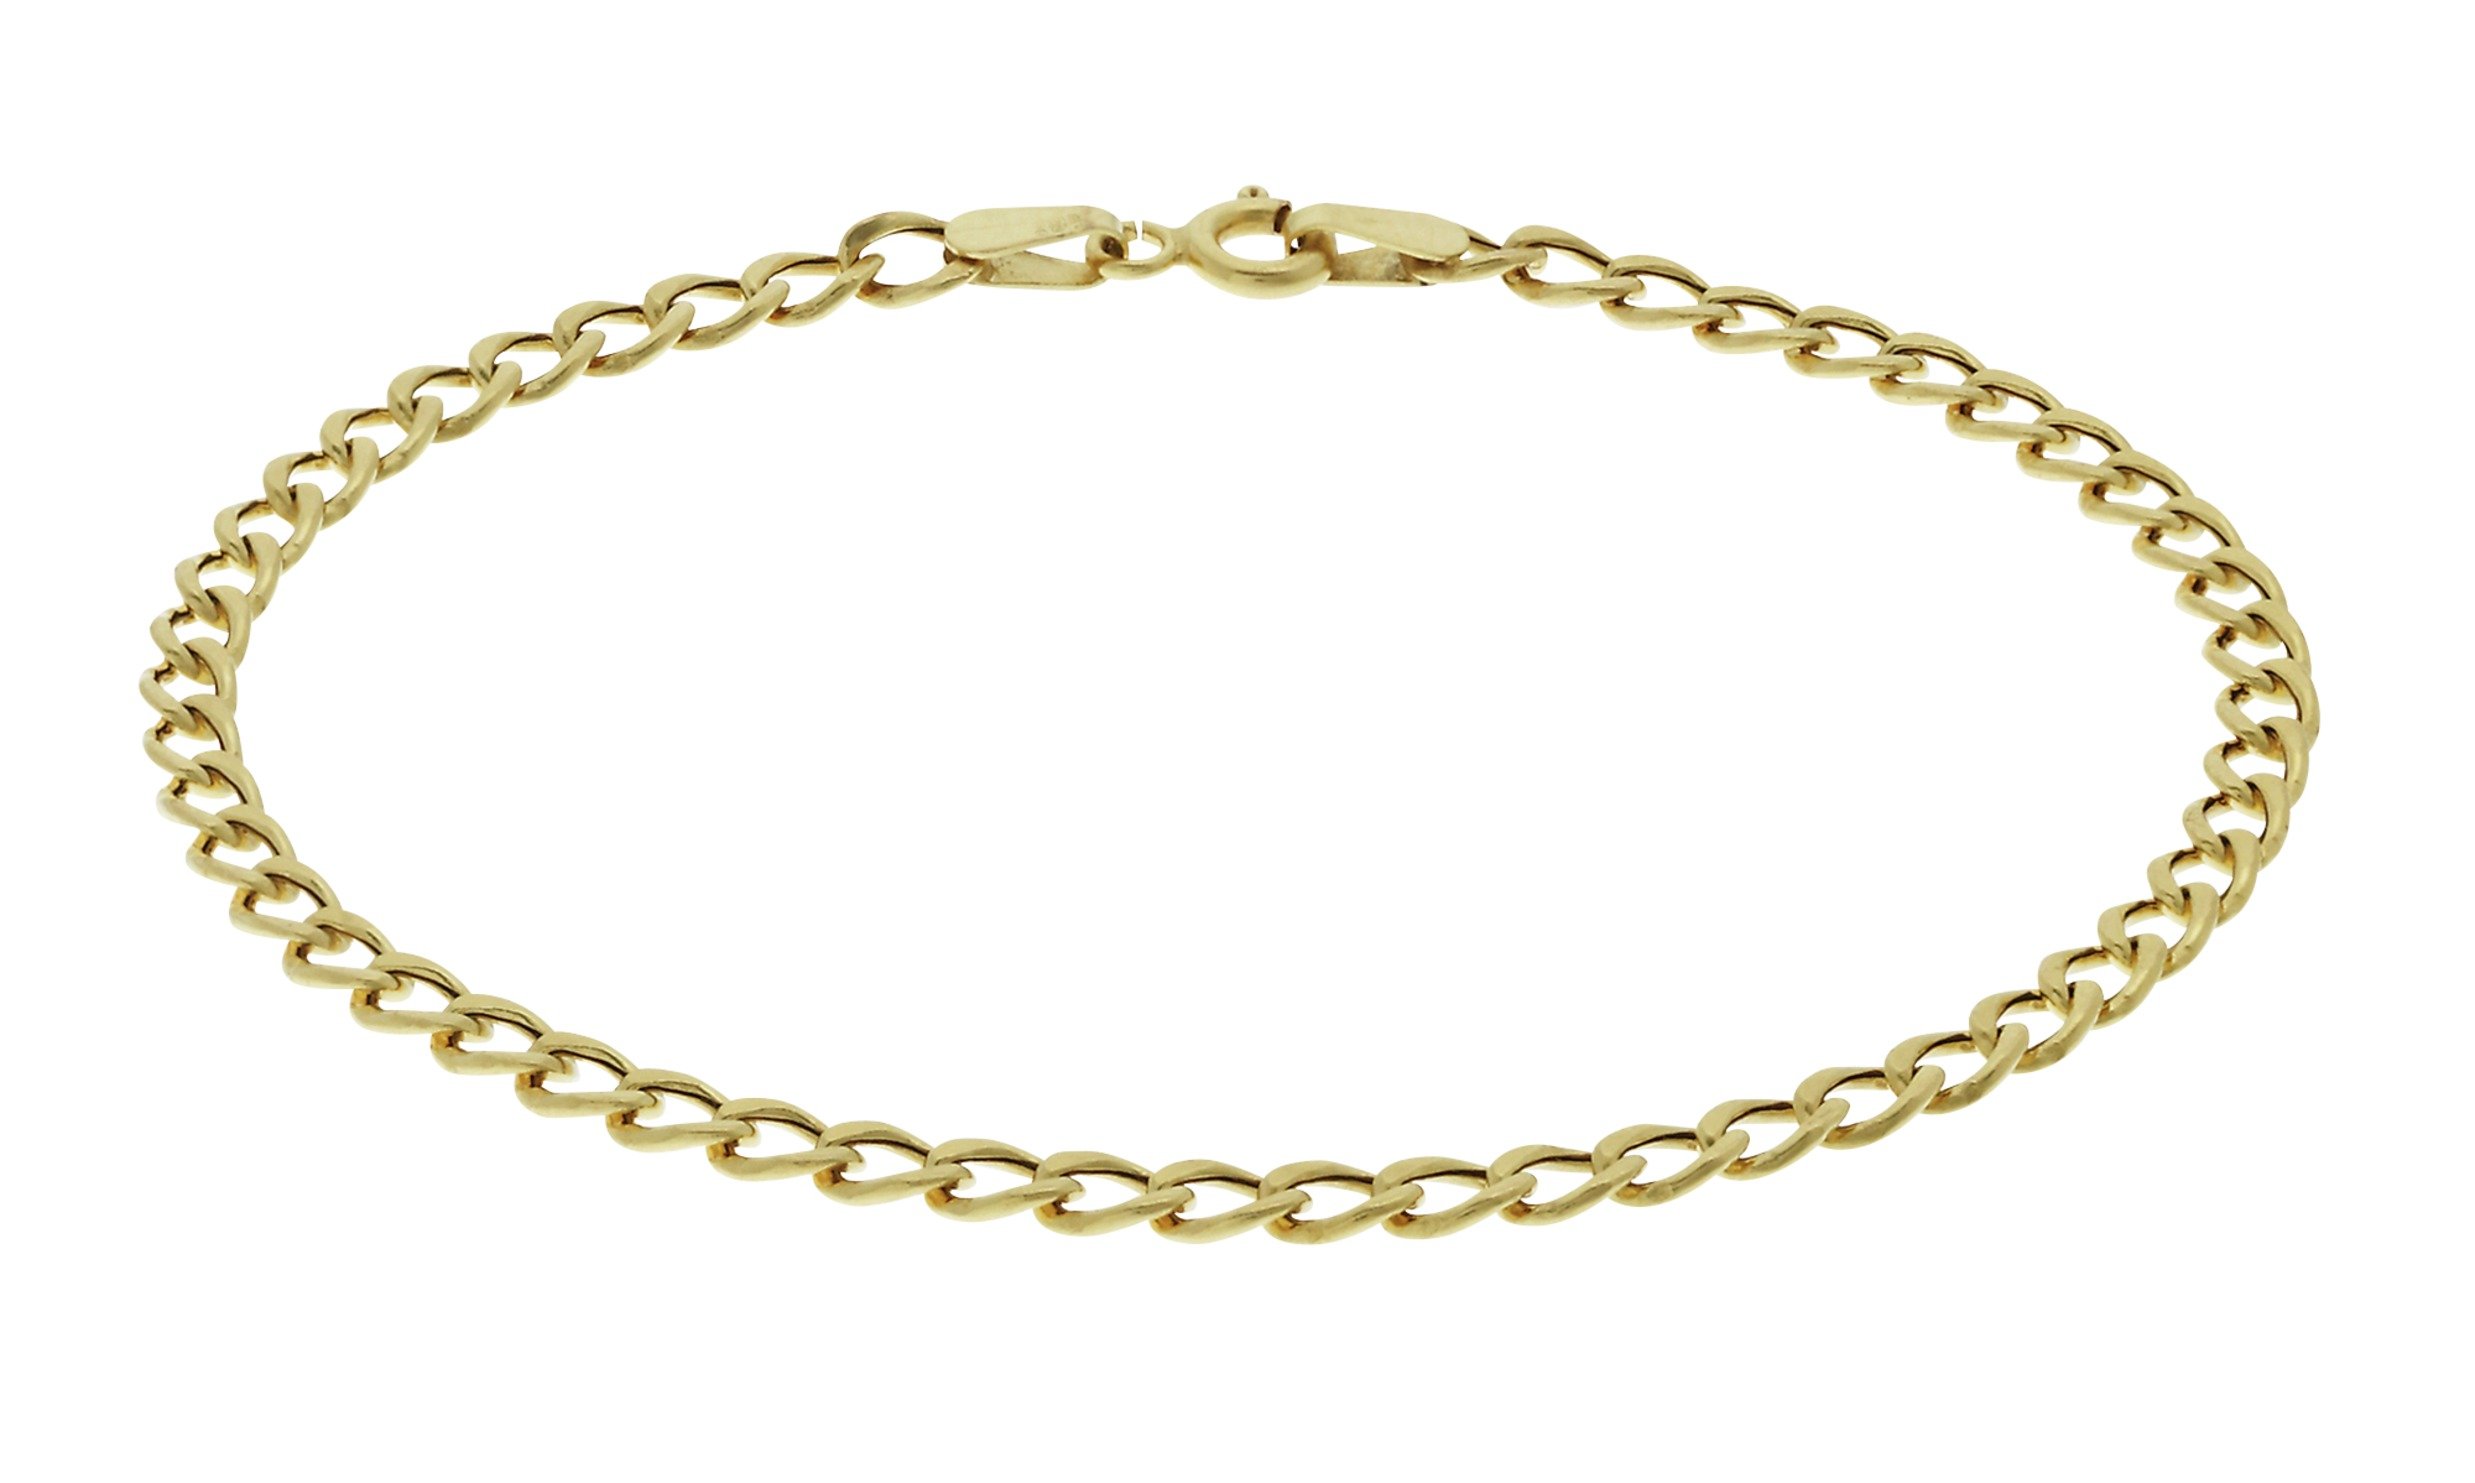 Revere 9ct Yellow Gold Hollow Curb Bracelet